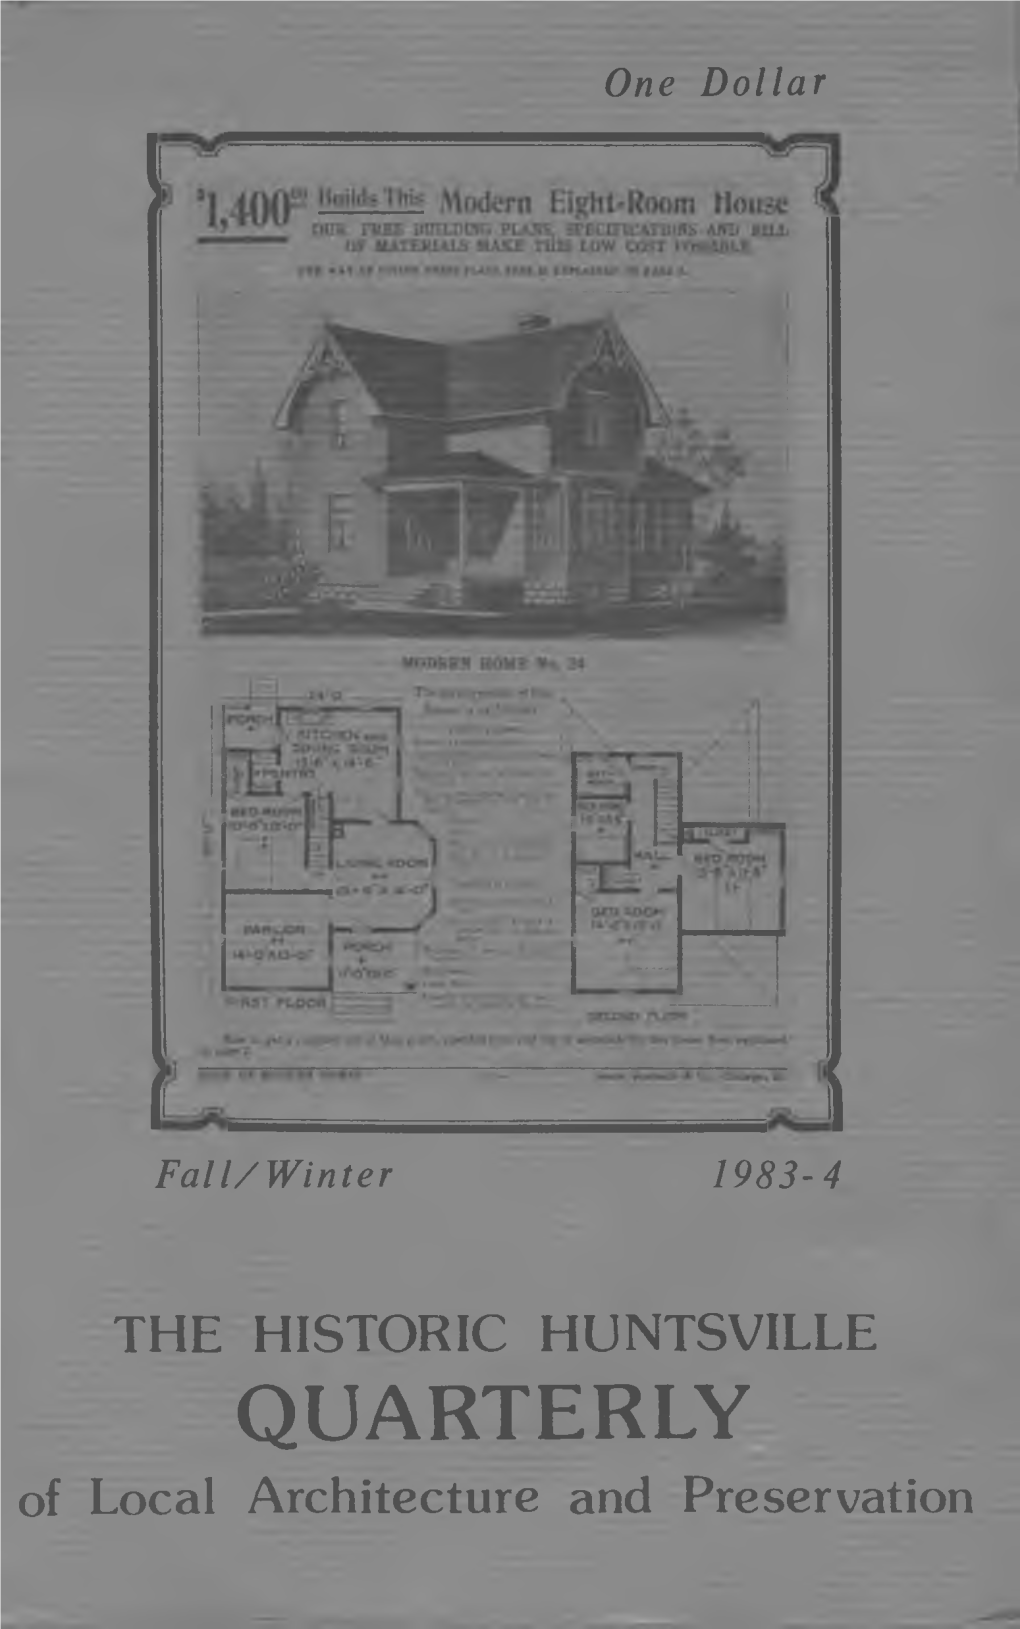 QUARTERLY of Local Architecture and Preservation